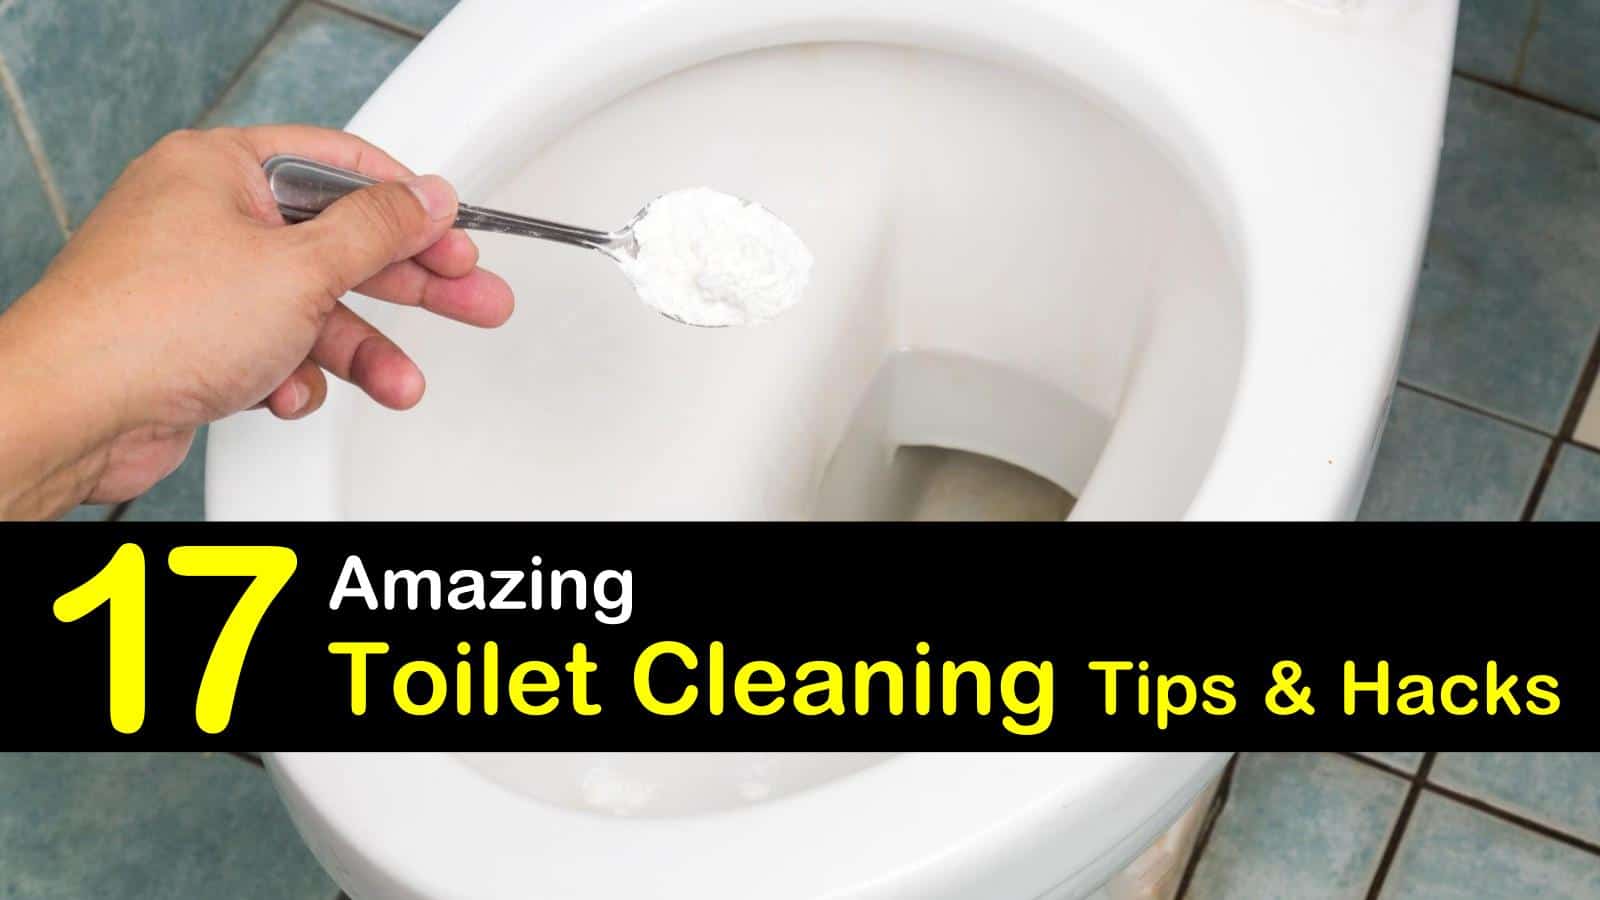 https://www.tipsbulletin.com/wp-content/uploads/2019/05/how-to-clean-a-toilet-t1.jpg